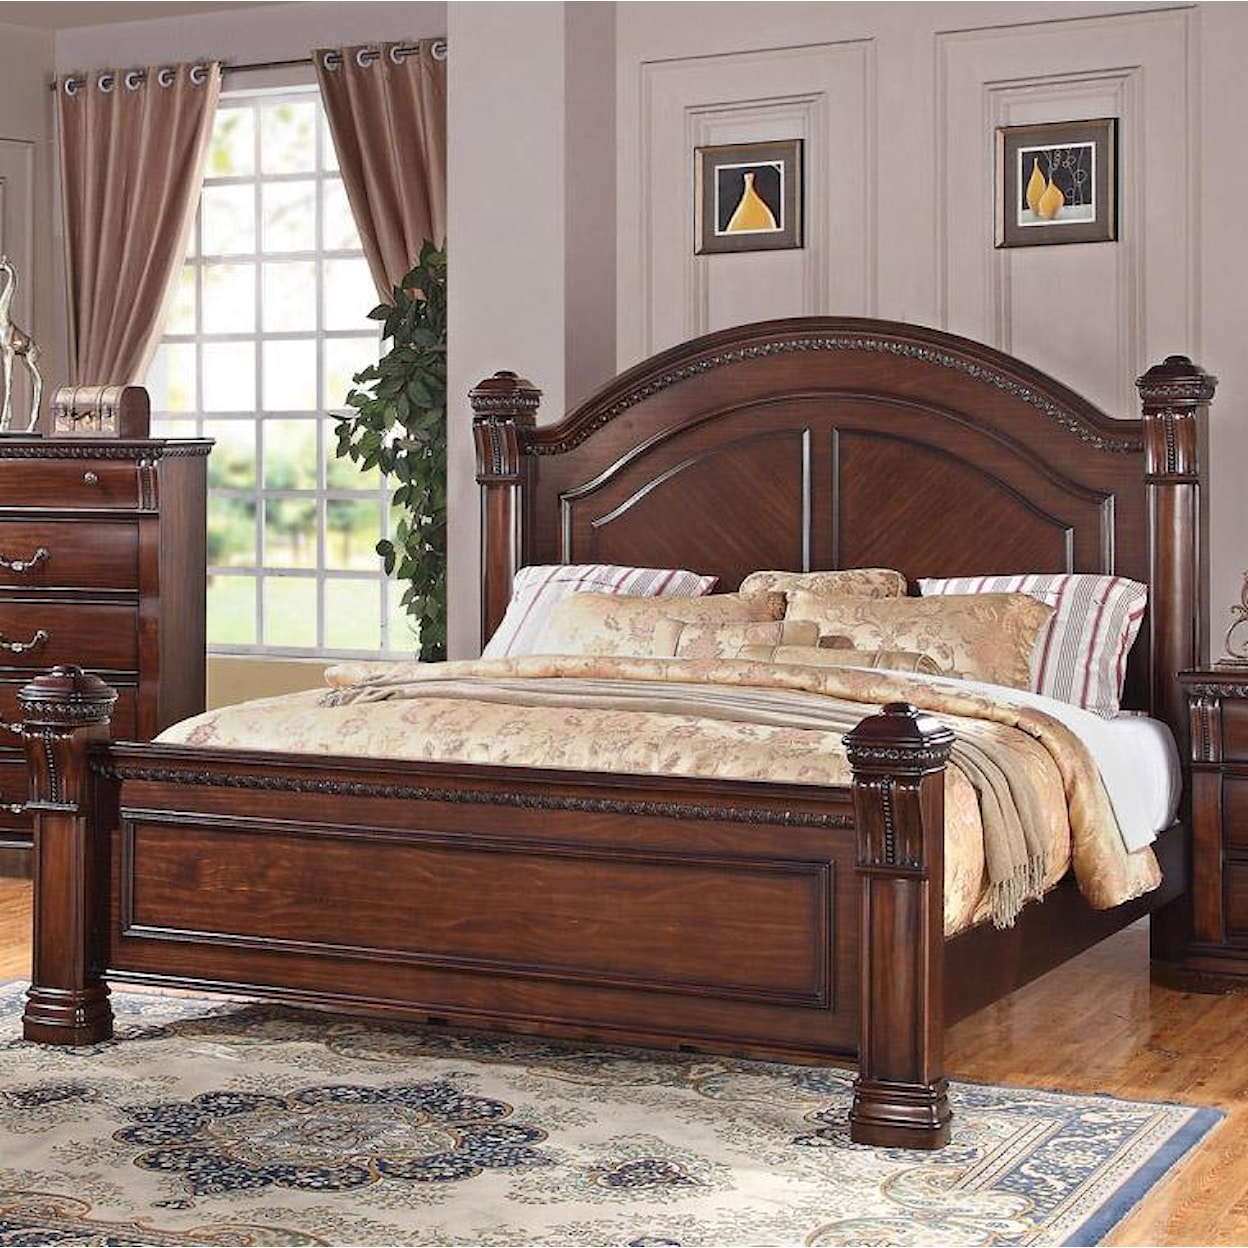 Austin Group Isabella Queen Bed